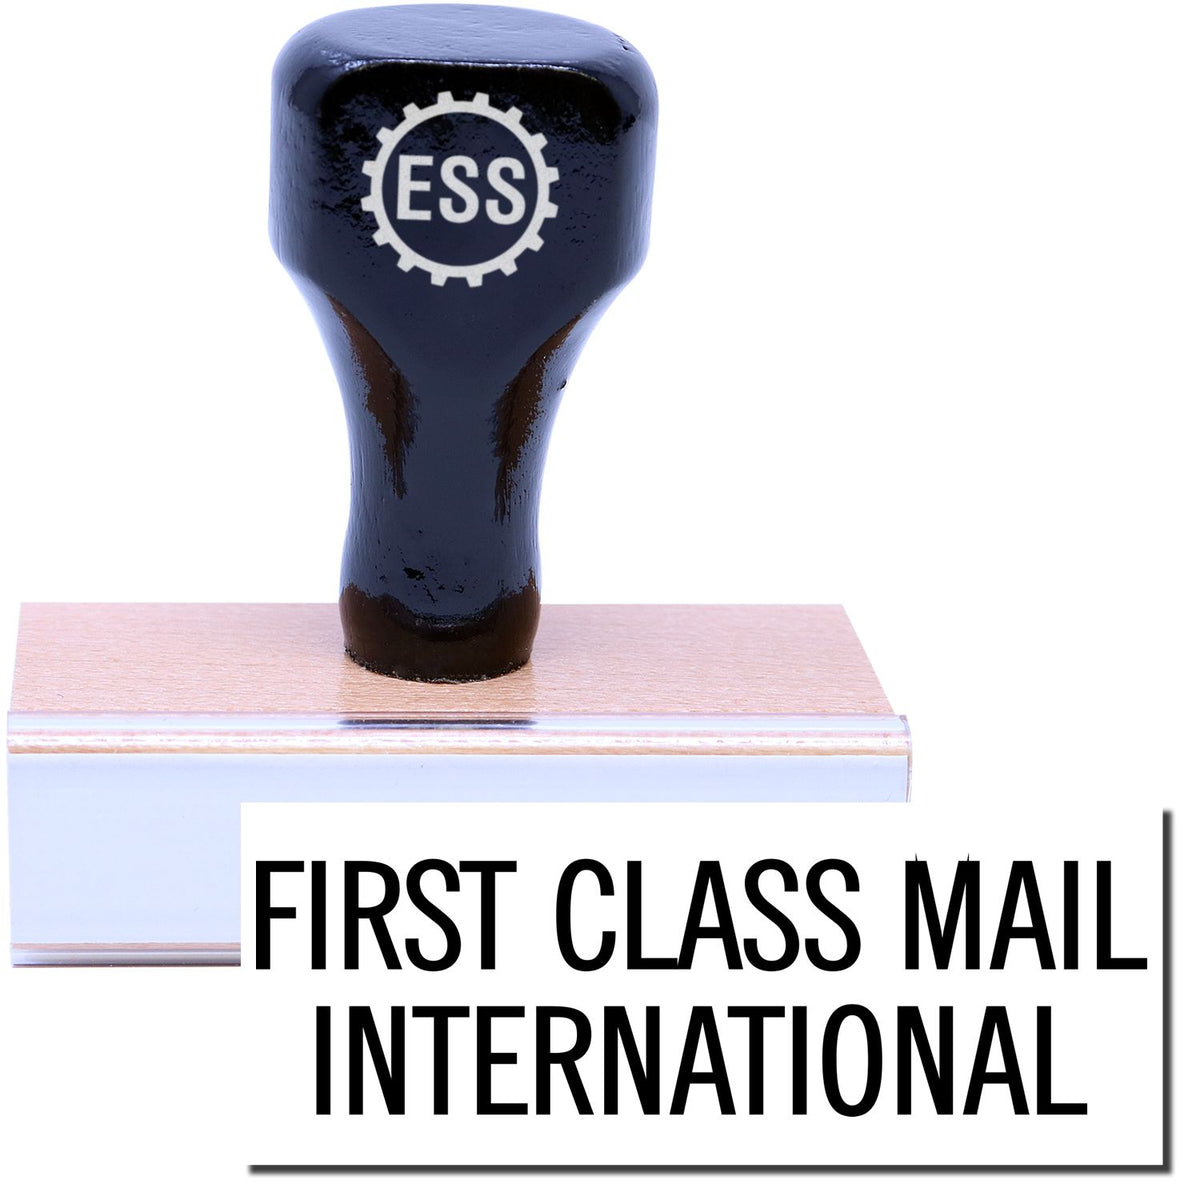 A stock office rubber stamp with a stamped image showing how the text &quot;FIRST CLASS MAIL INTERNATIONAL&quot; in a large font is displayed after stamping.